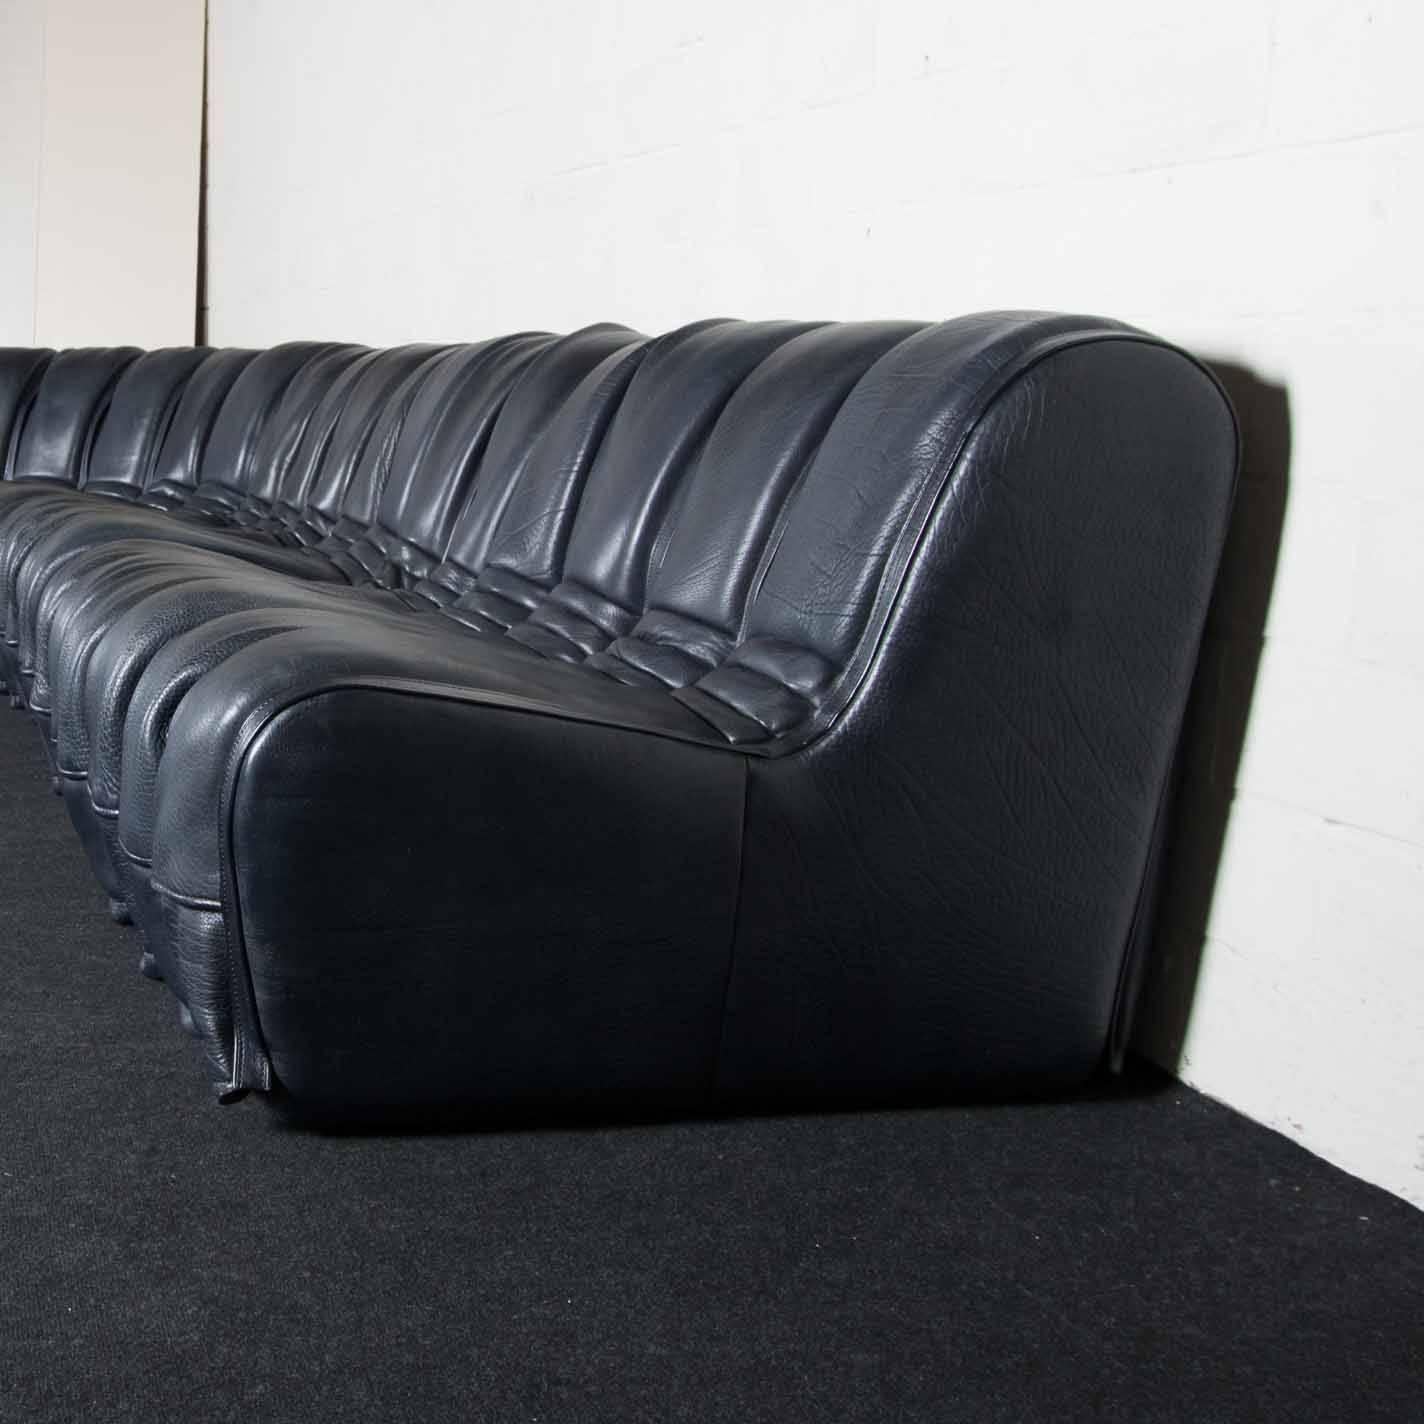 Rare De Sede DS600 Sofa In Good Condition For Sale In Meulebeke, BE